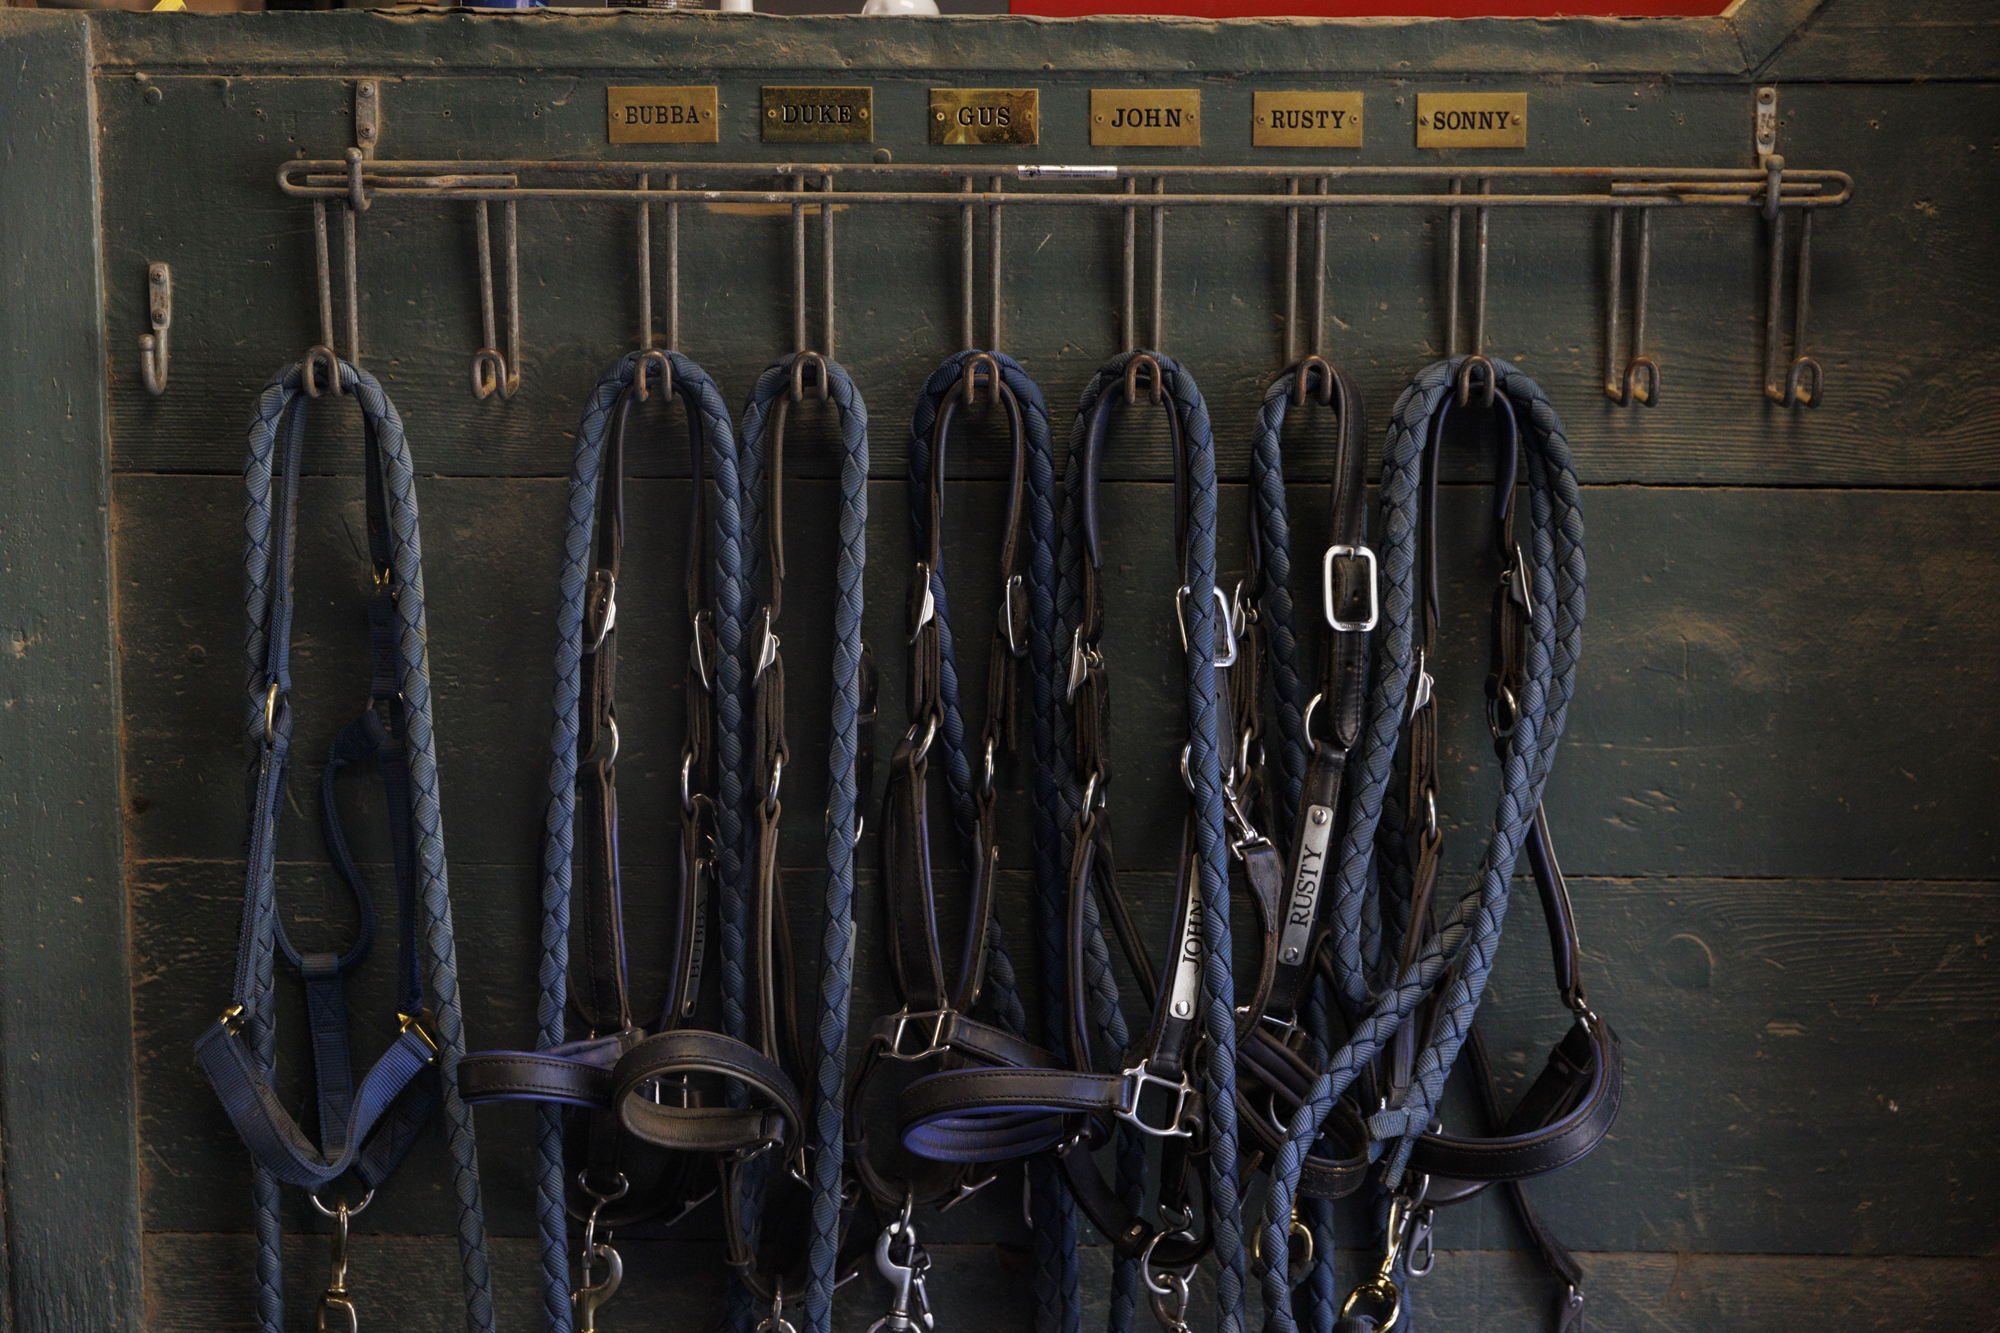 Horse bridles and bits hang from labeled hooks.